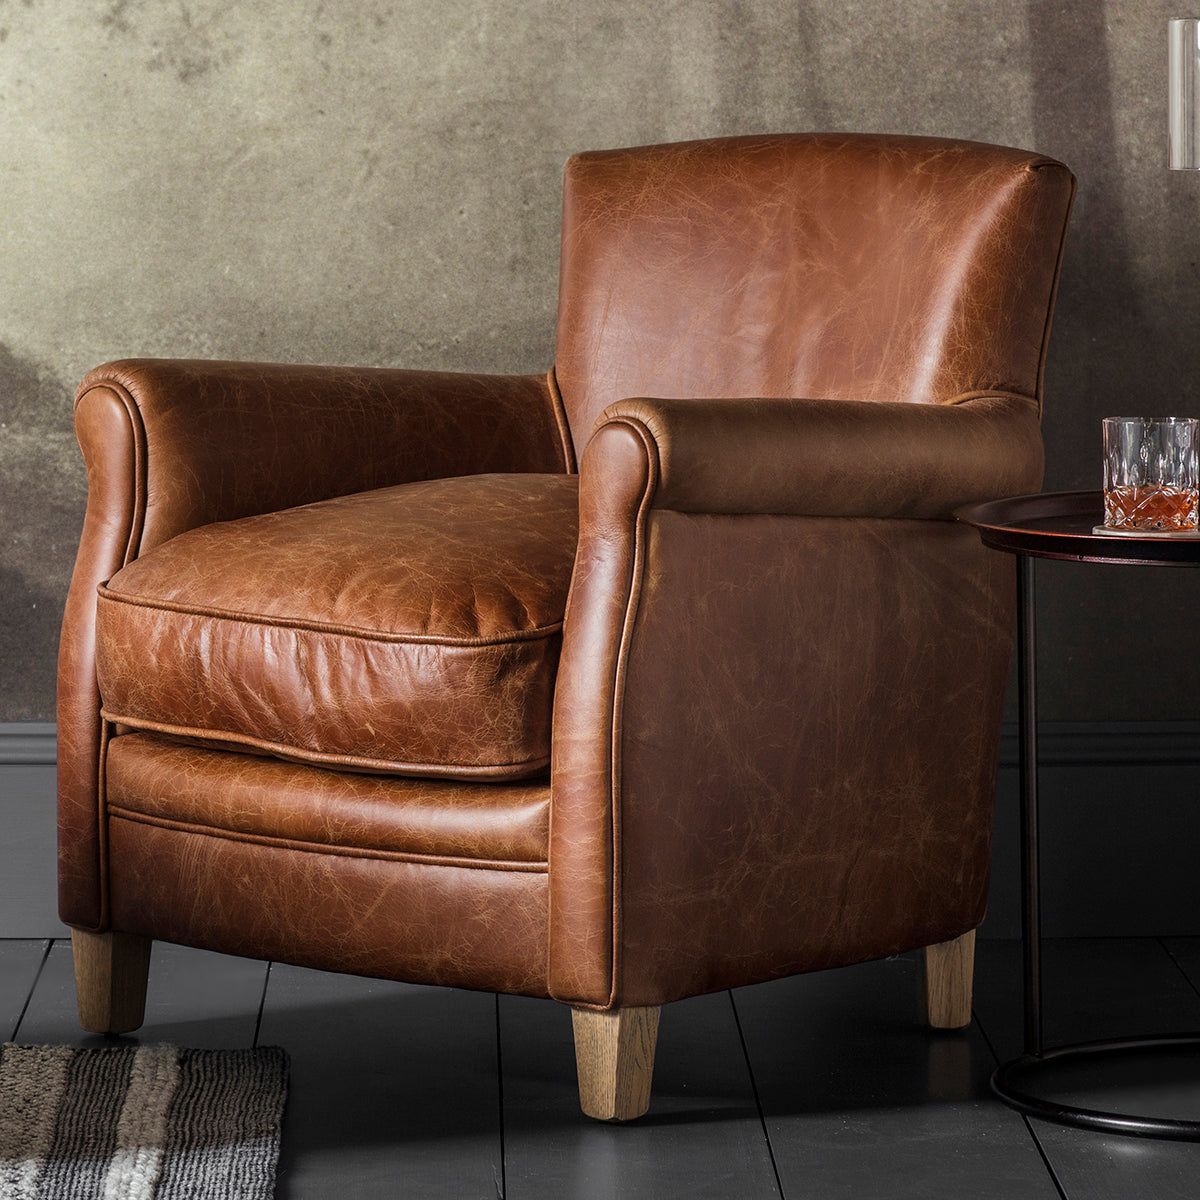 Theodore Chair - Vintage Brown Leather